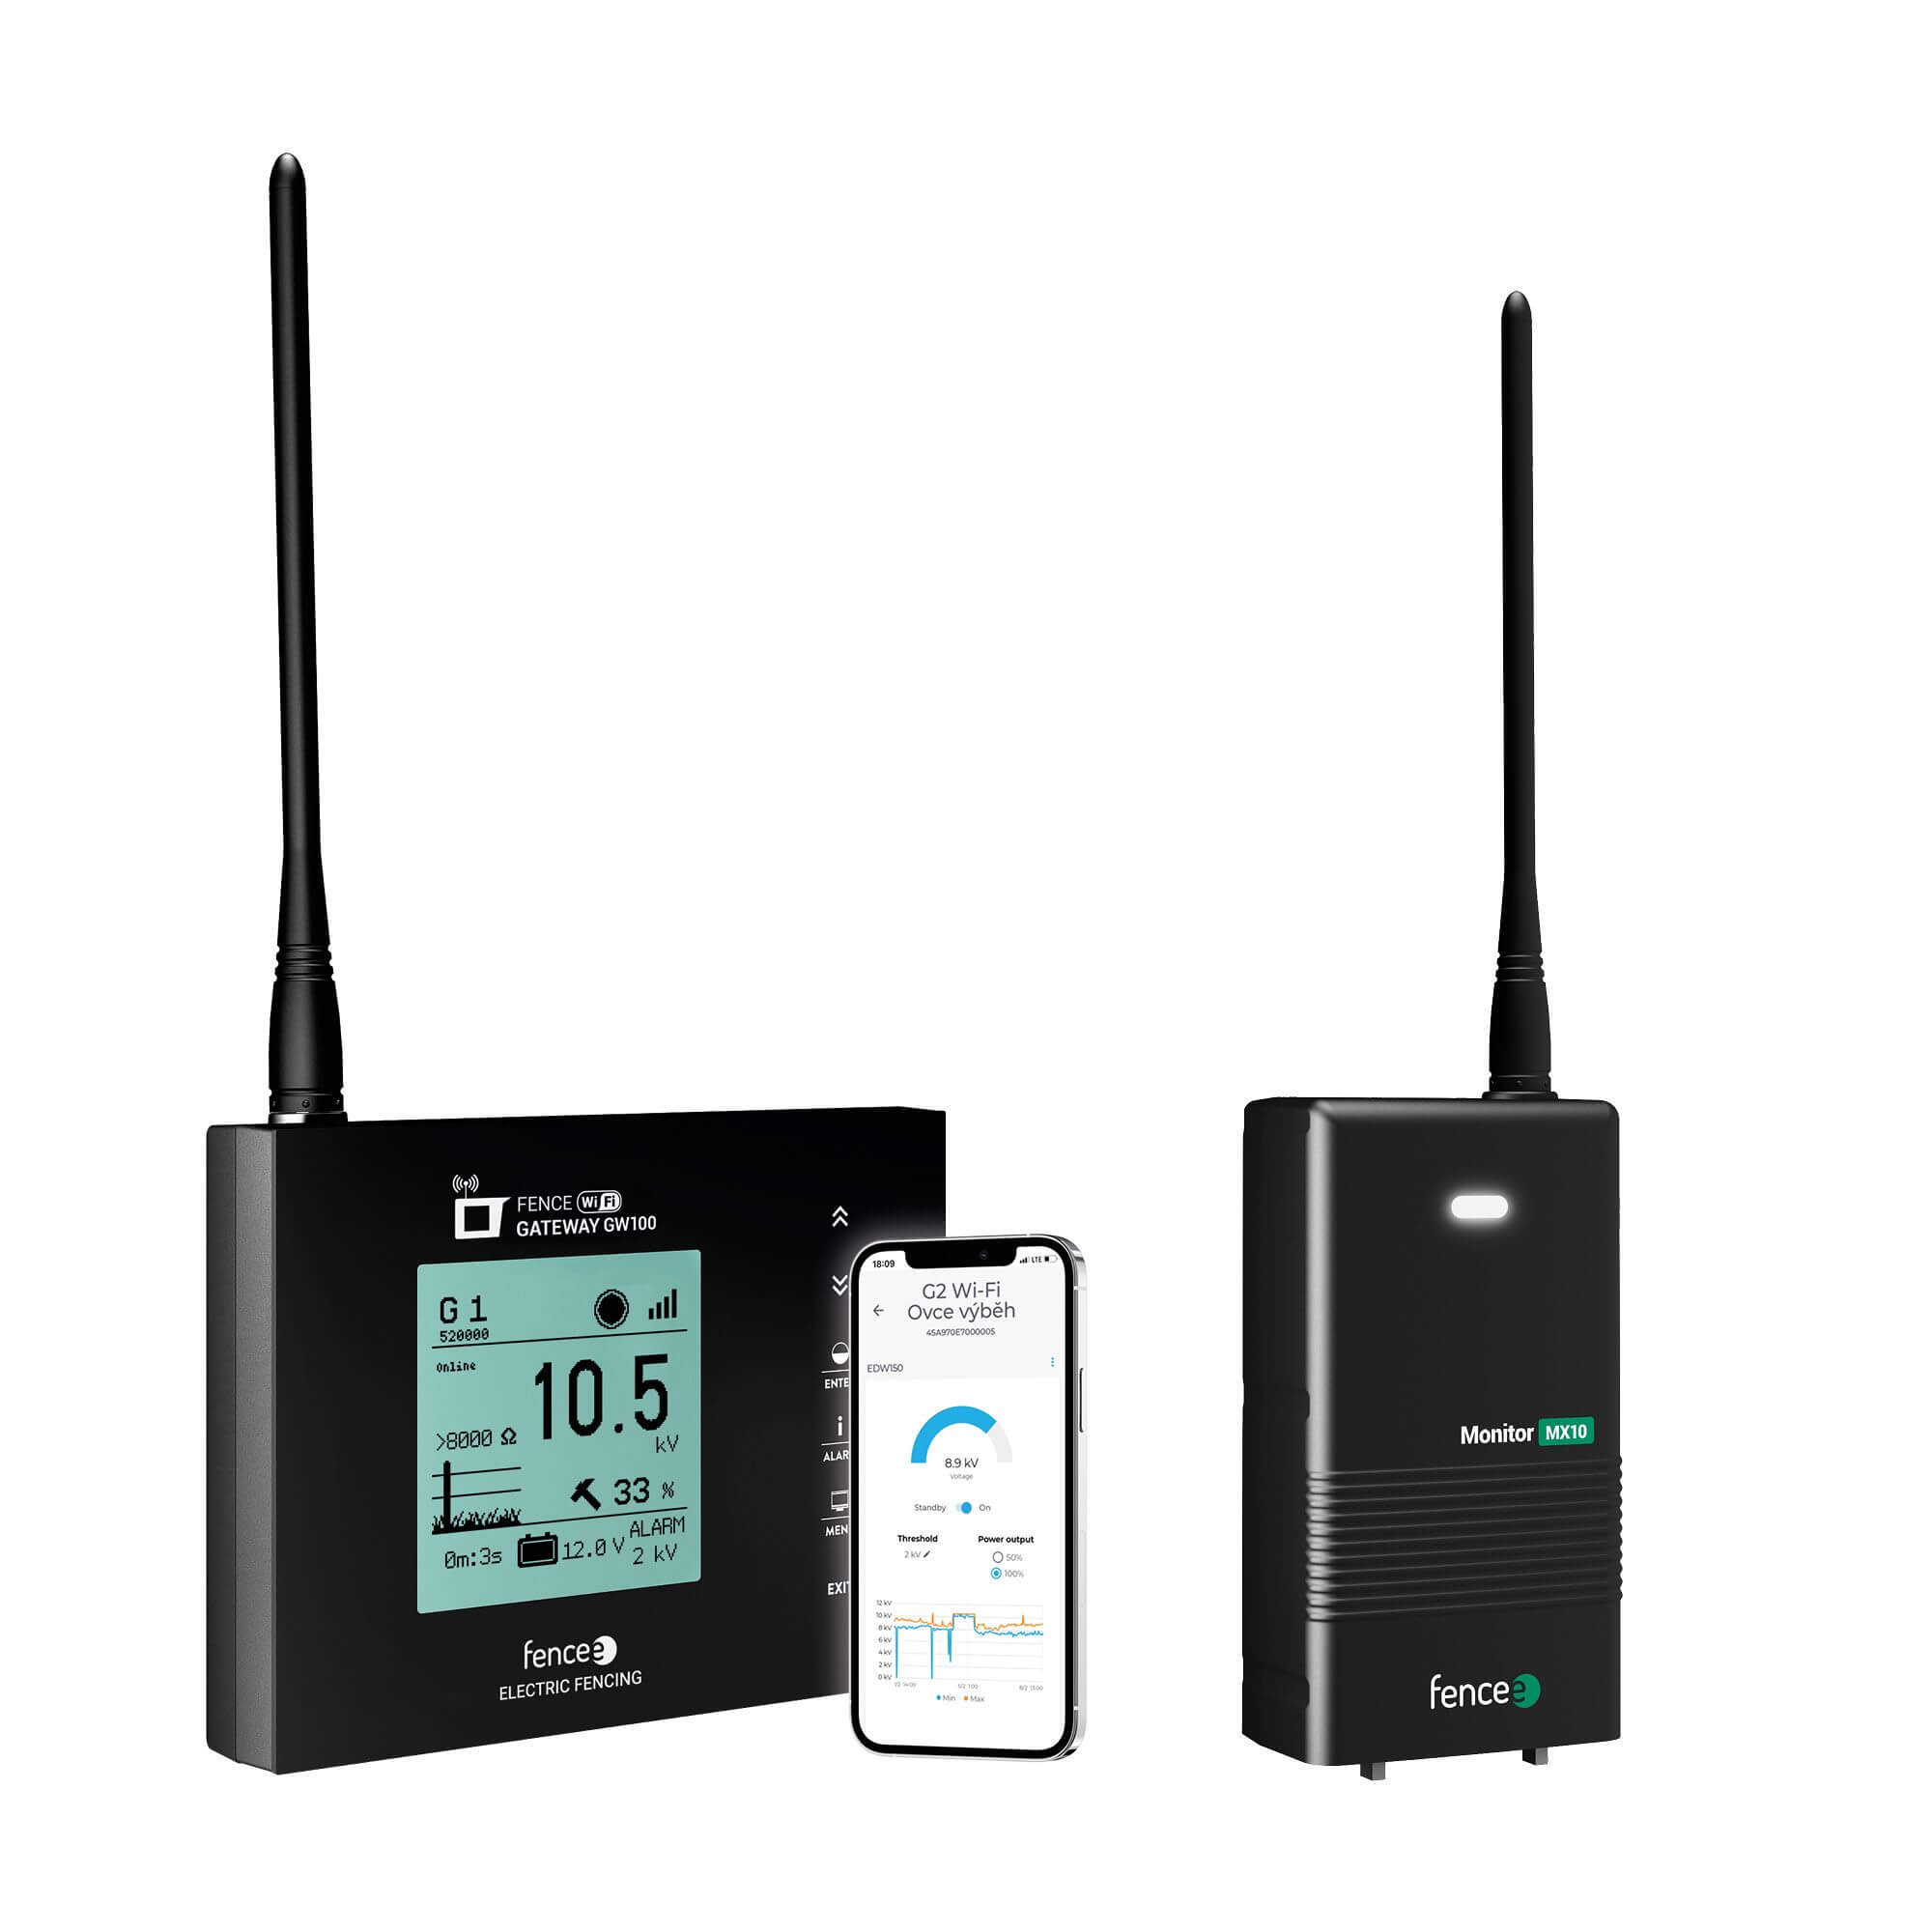 Universal electric fence online monitoring set - WiFi Gateway - Monitor MX10 fencee